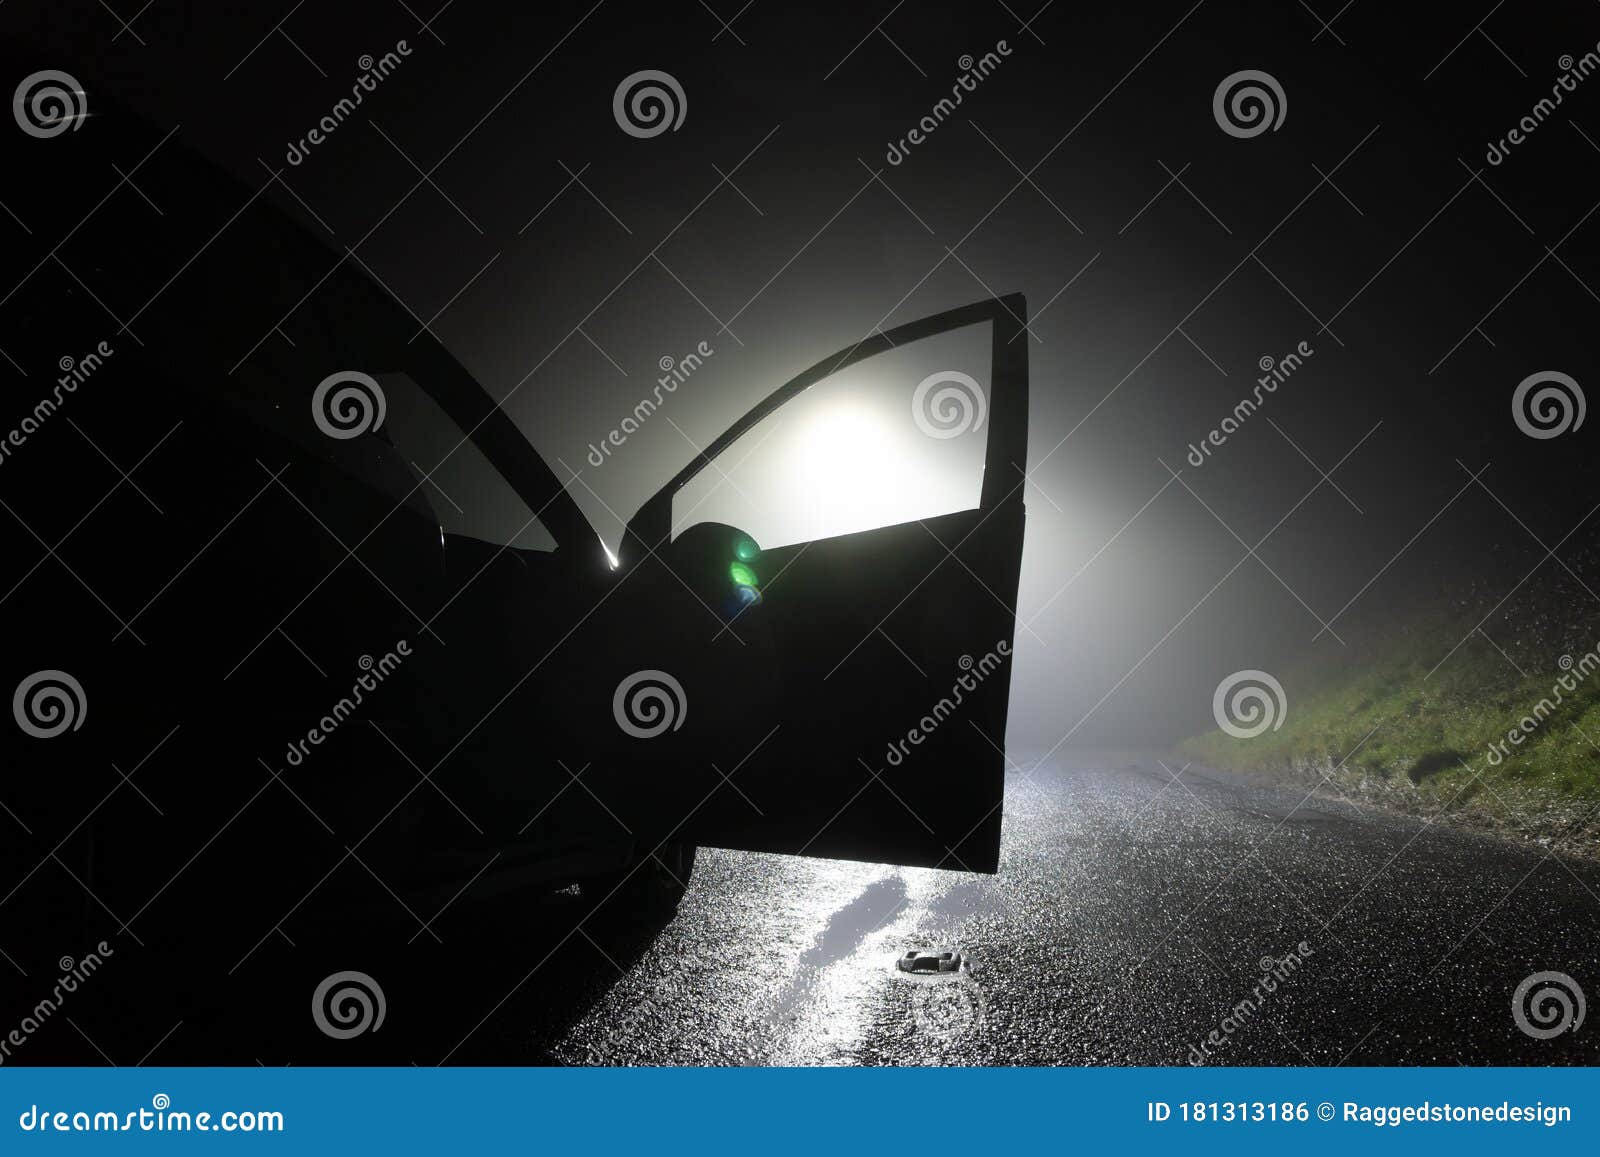 a car parked, with door open, on the side of the road, underneath a street light. on a foggy winters night